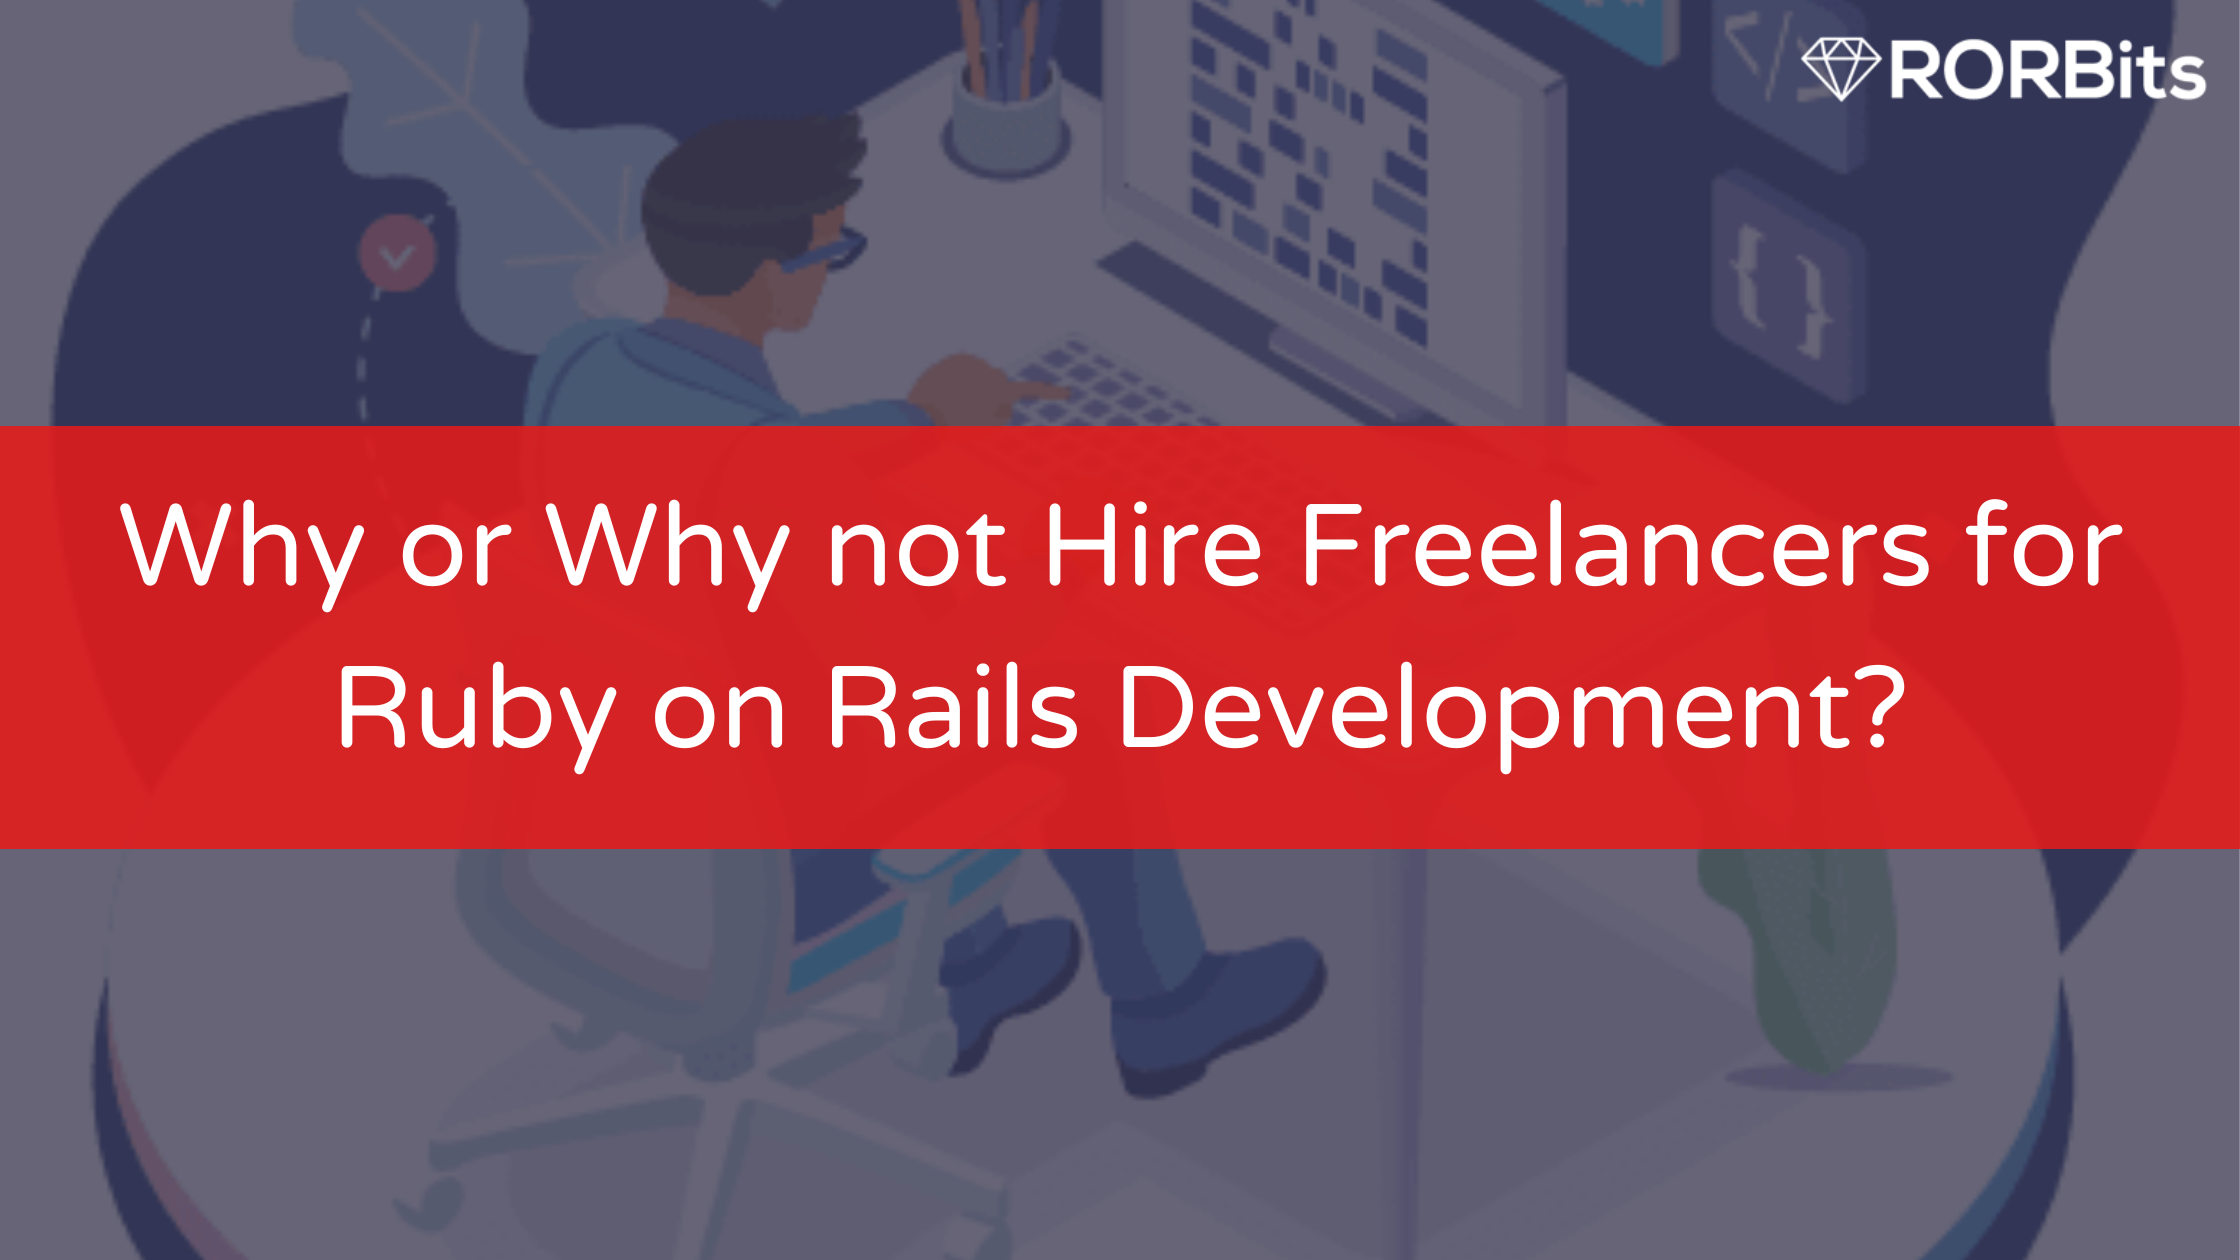 Why or Why not Hire Freelancers for Ruby on Rails Development?